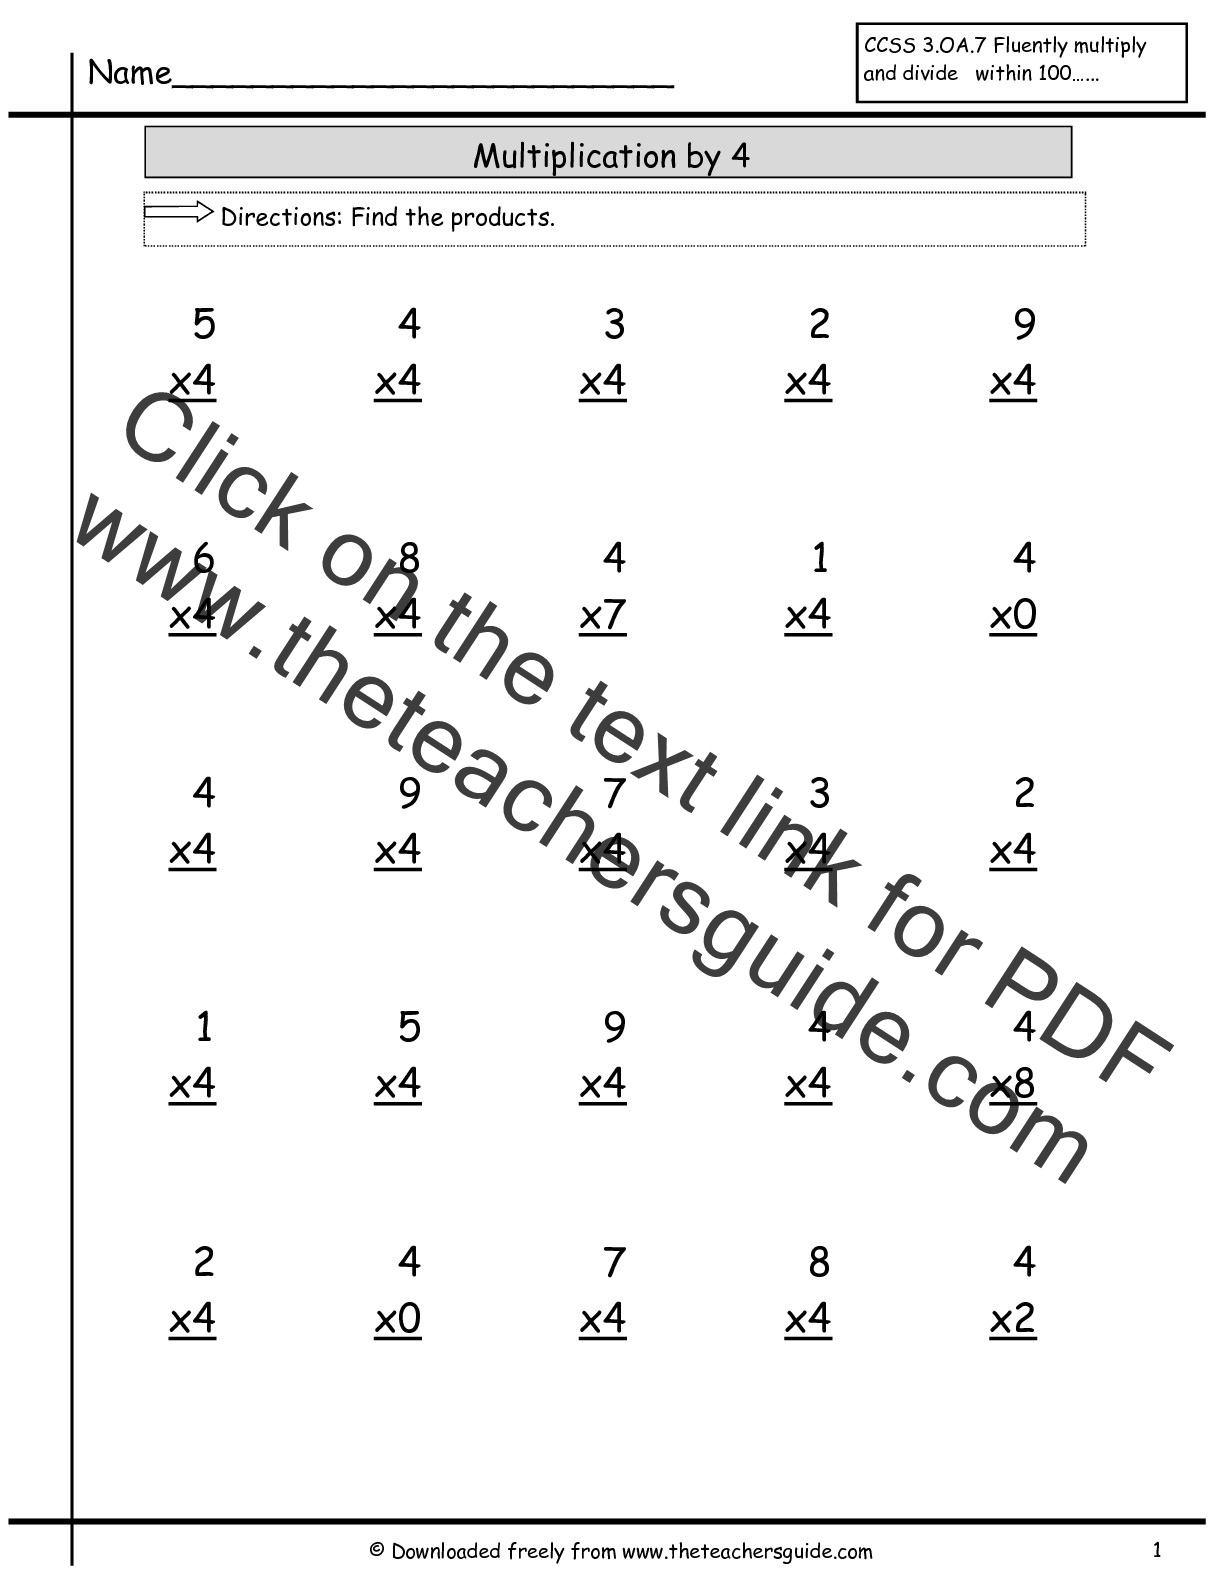 Free Multiplication Facts Worksheets 5th Grade